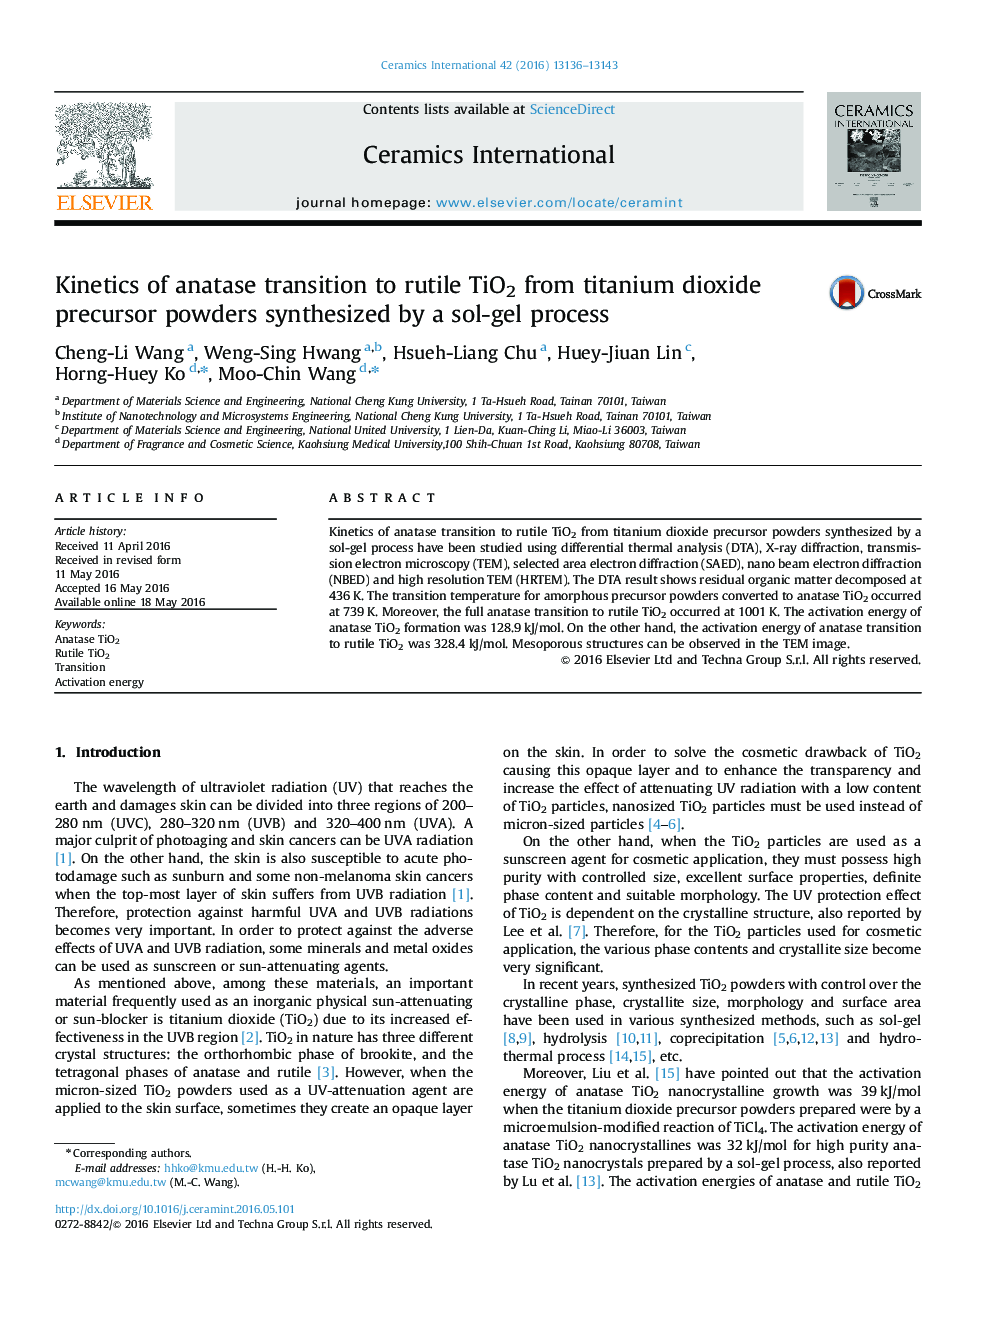 Kinetics of anatase transition to rutile TiO2 from titanium dioxide precursor powders synthesized by a sol-gel process